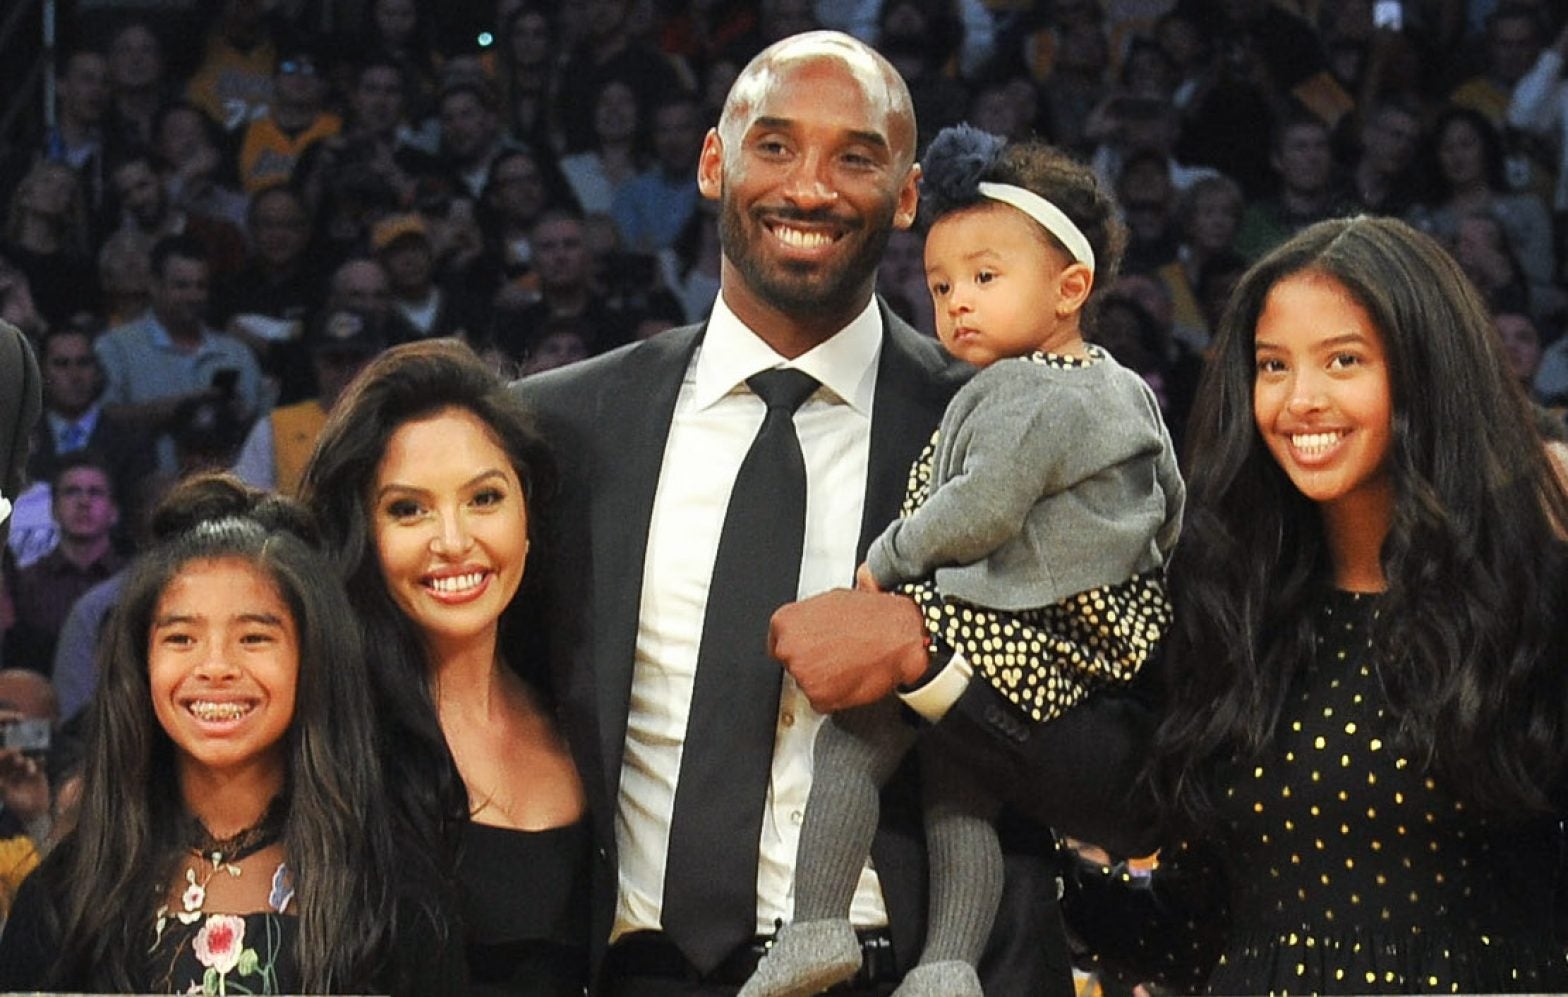 Vanessa Bryant Reveals What She'll Miss Most About Her Husband Kobe And Daughter Gianna